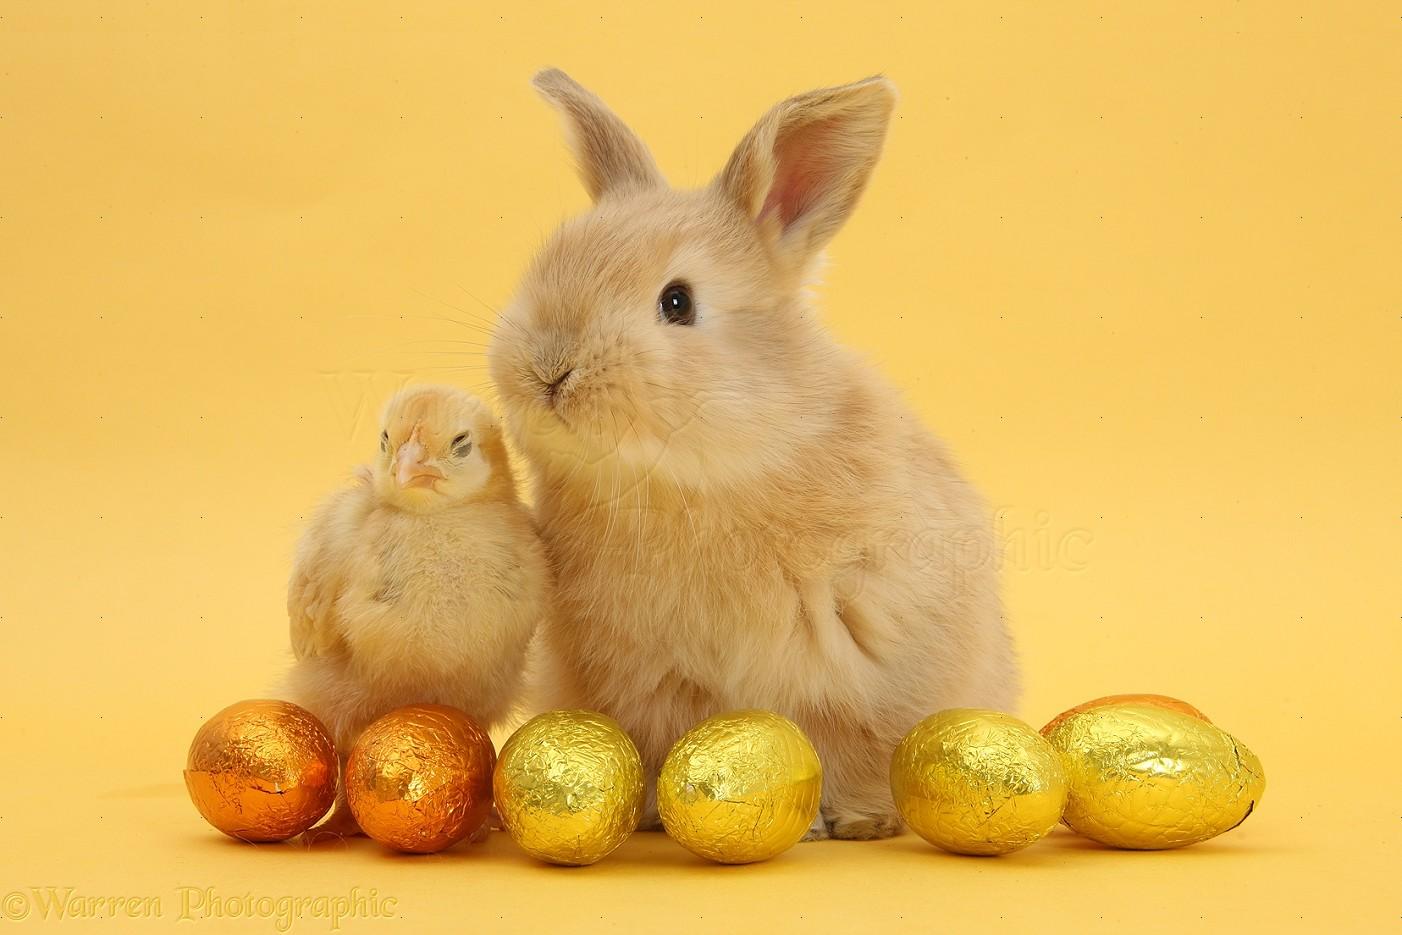 Wp33857 Sandy Baby Rabbit And Yellow Bantam Chick With